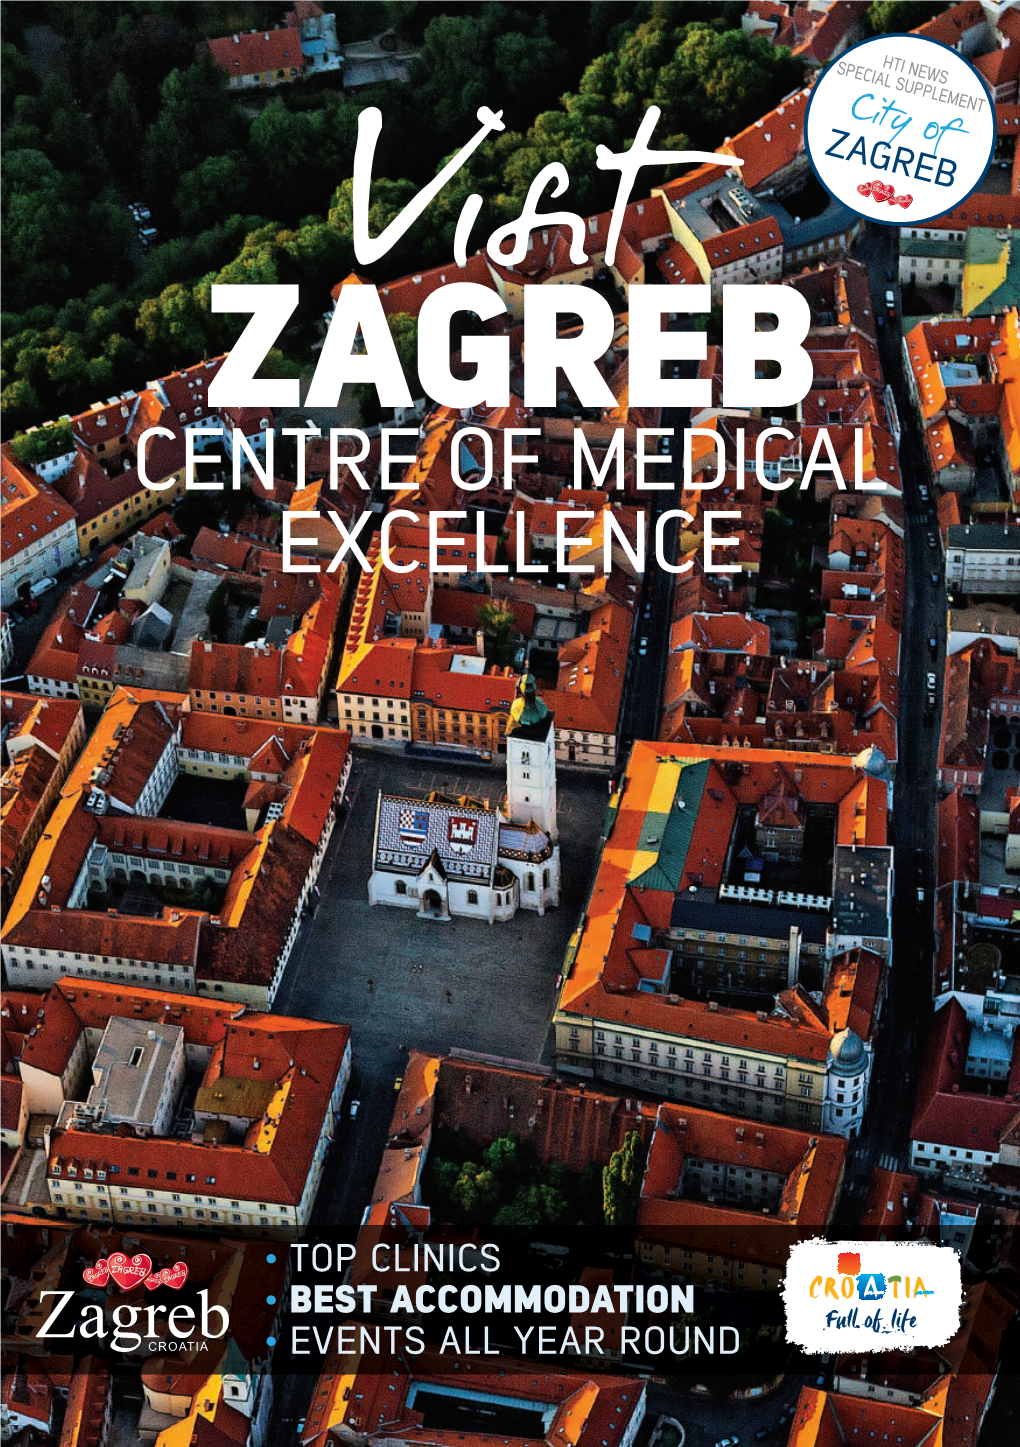 Centre of Medical Excellence